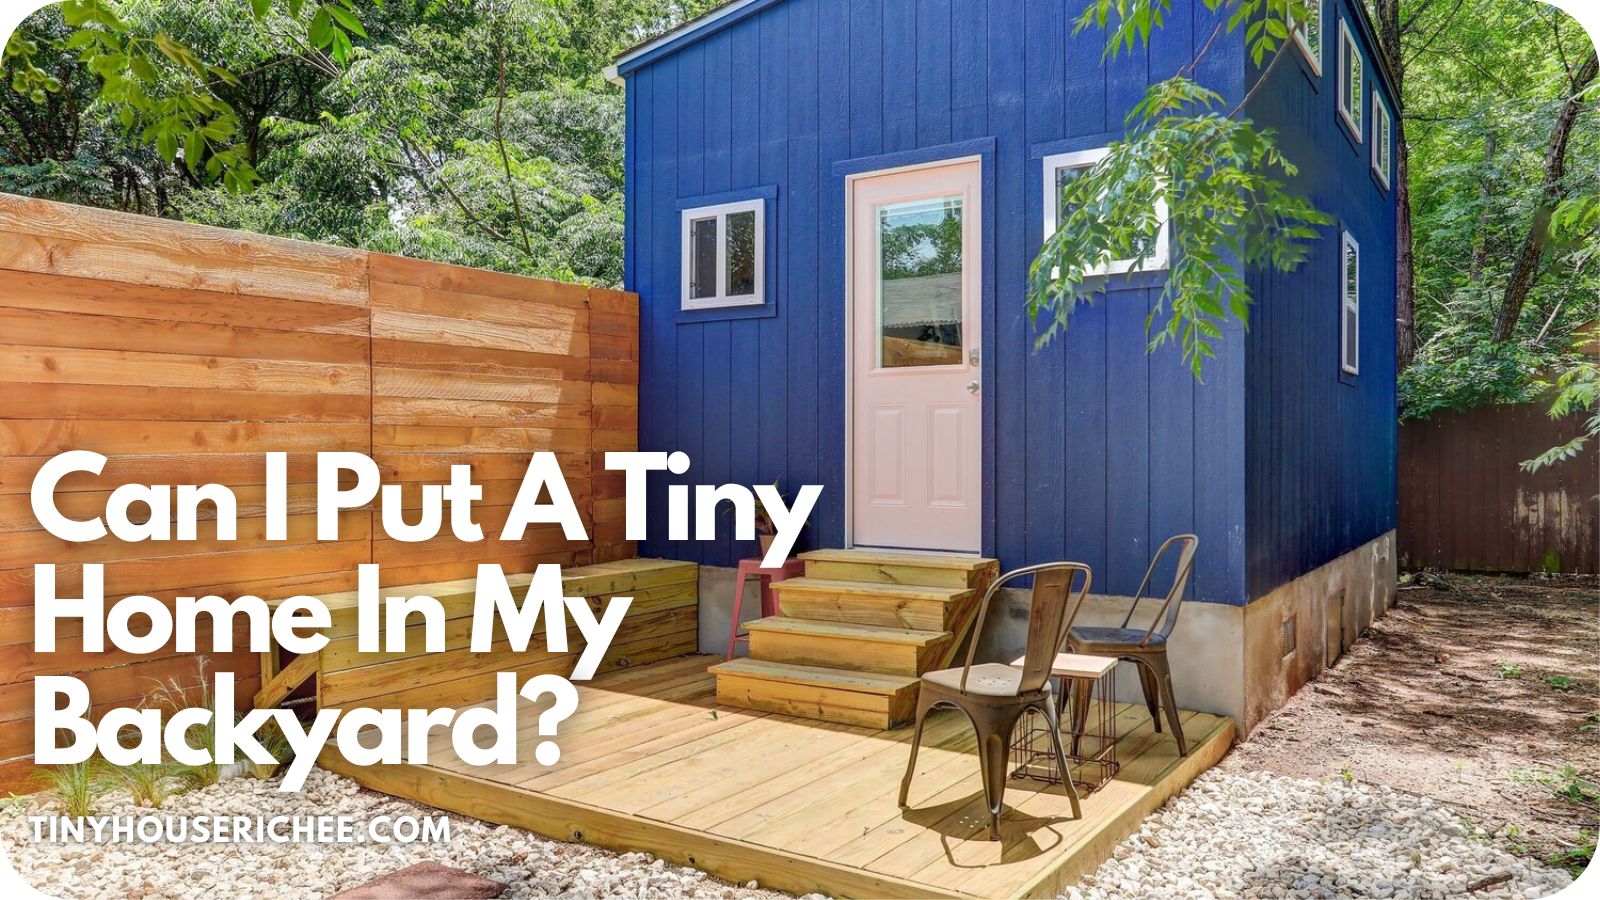 Can I Put A Tiny Home In My Backyard?